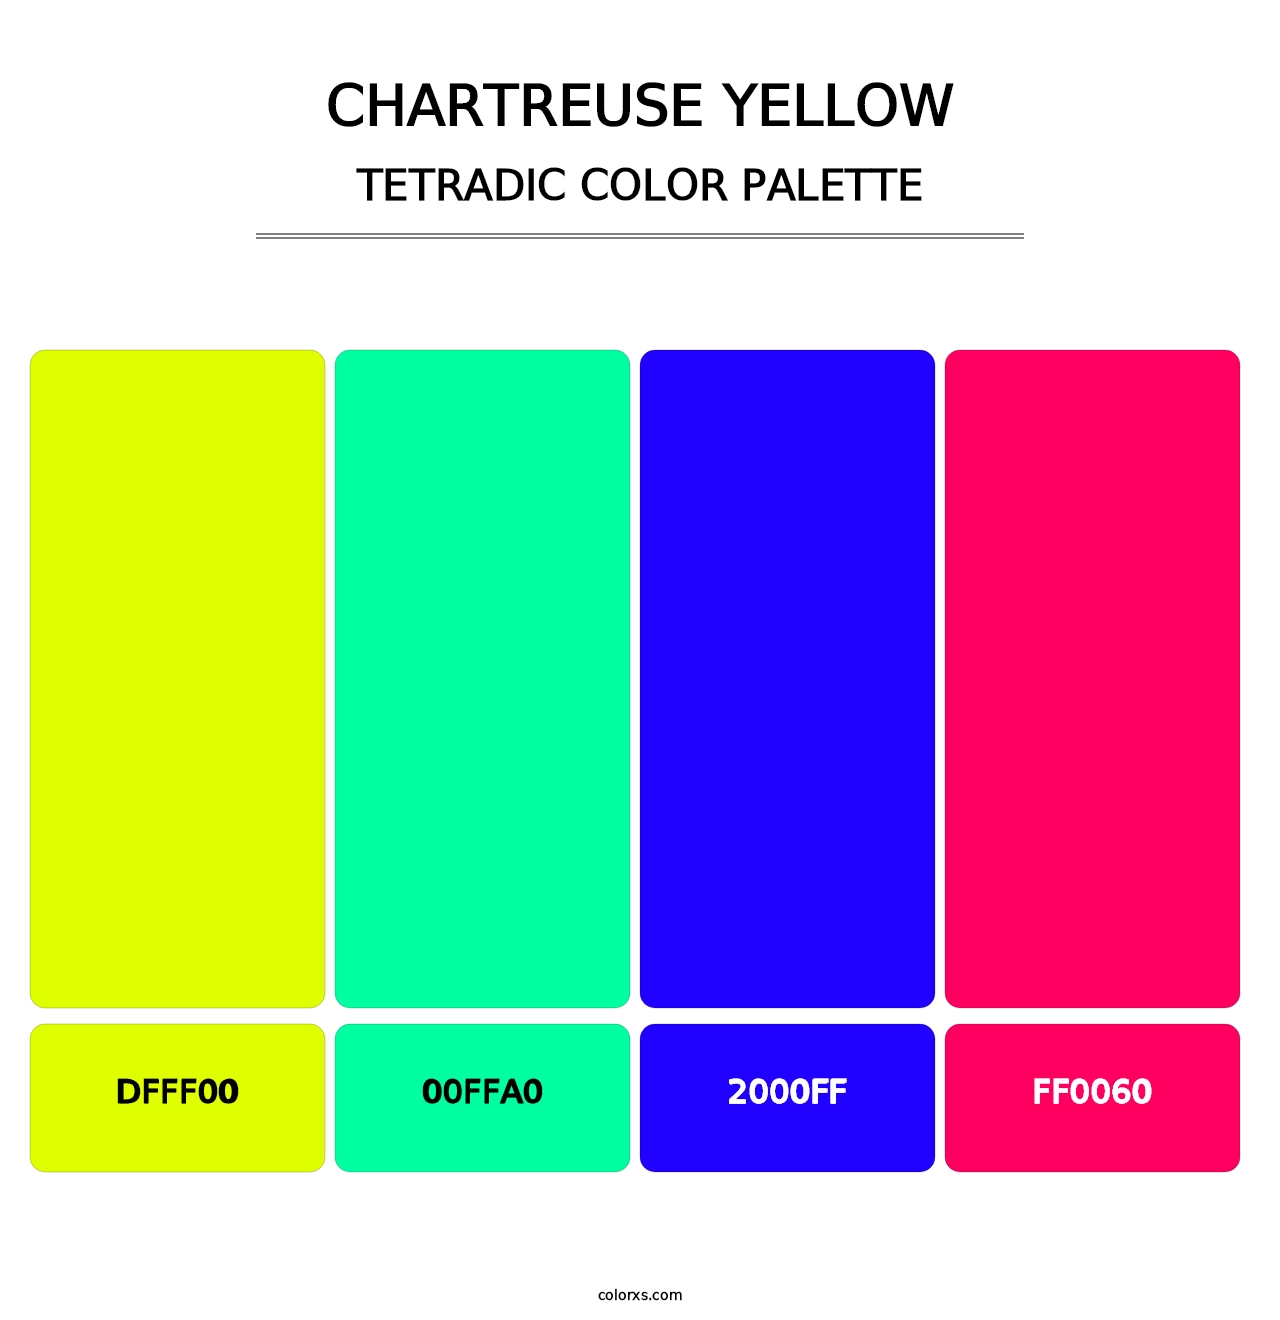 Chartreuse Yellow - Tetradic Color Palette